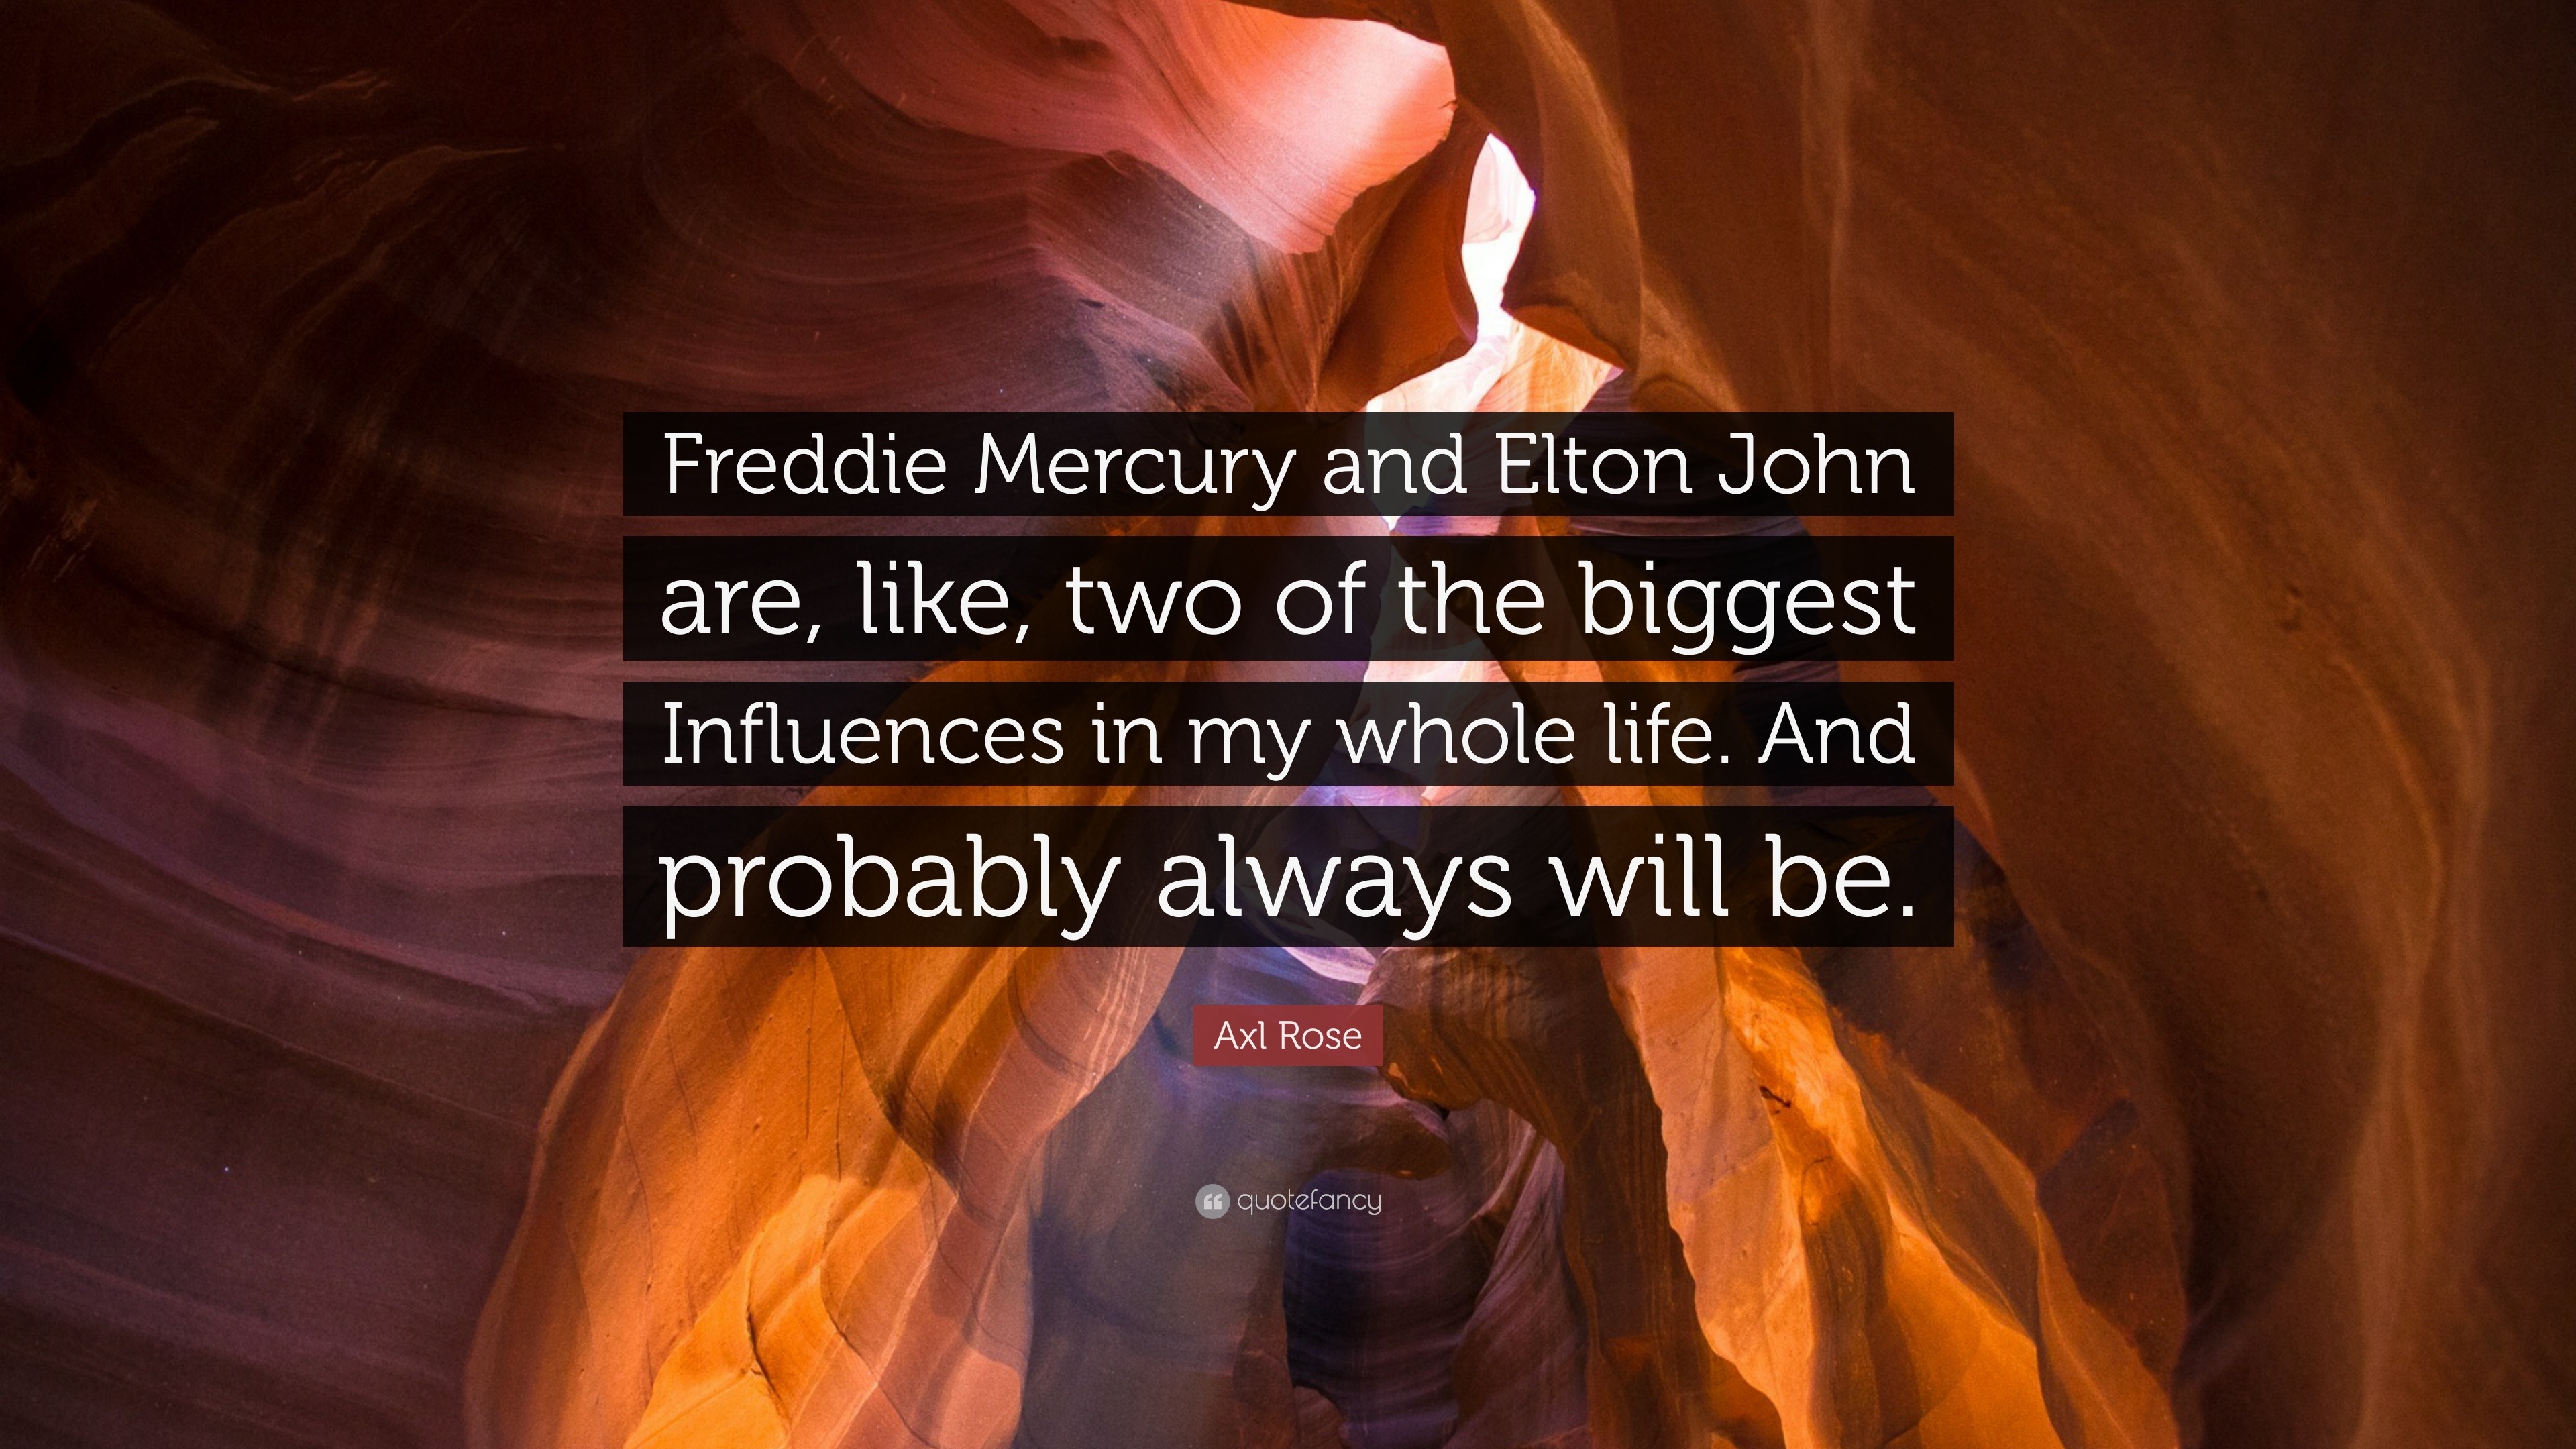 Axl Rose Quote Freddie Mercury And Elton John Are Like Two Of